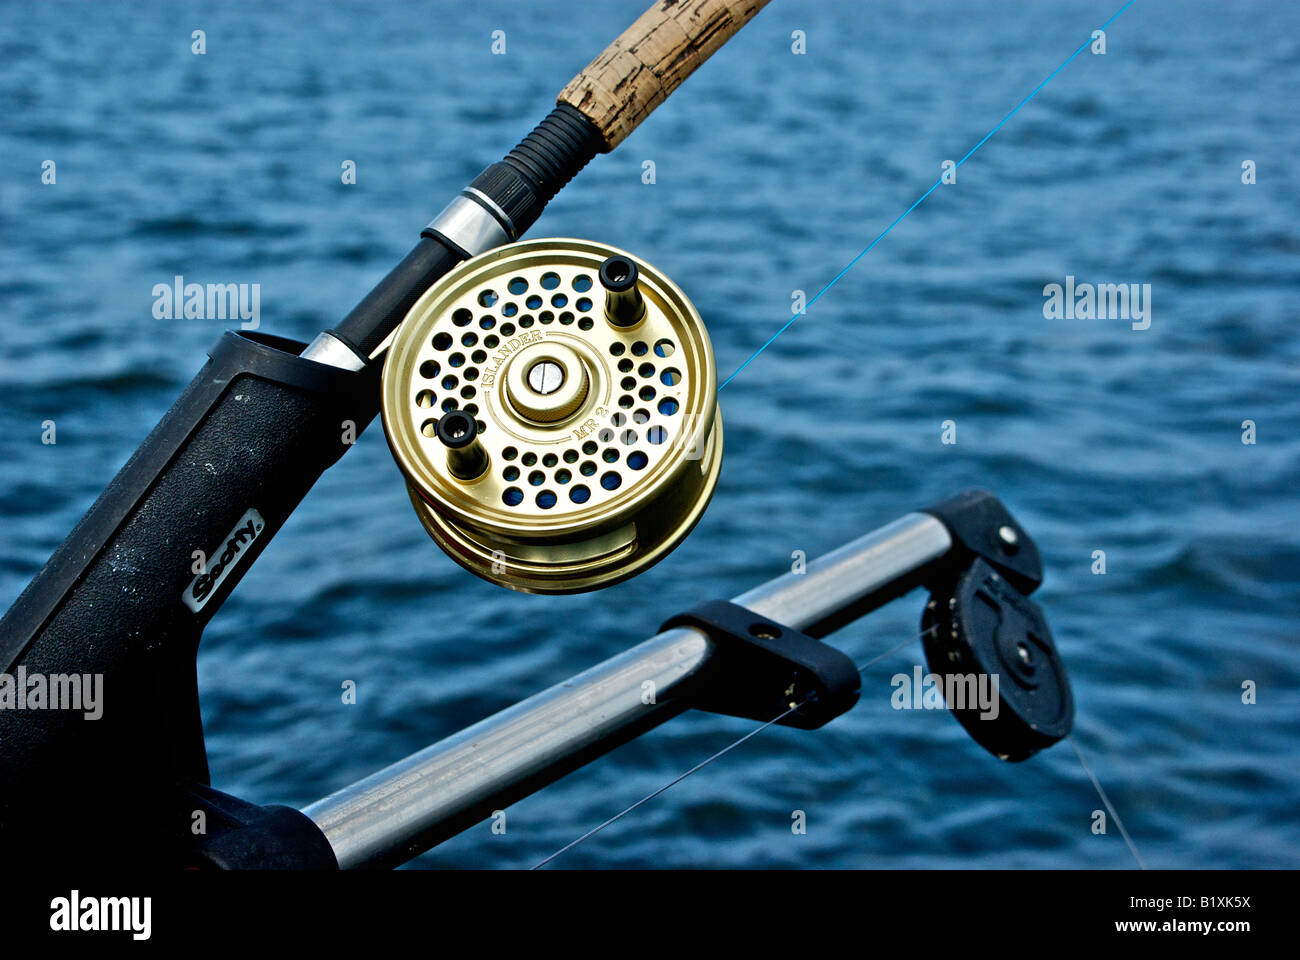 Single action Islander MR2 fishing reel used with a downrigger to troll for salmon Stock Photo